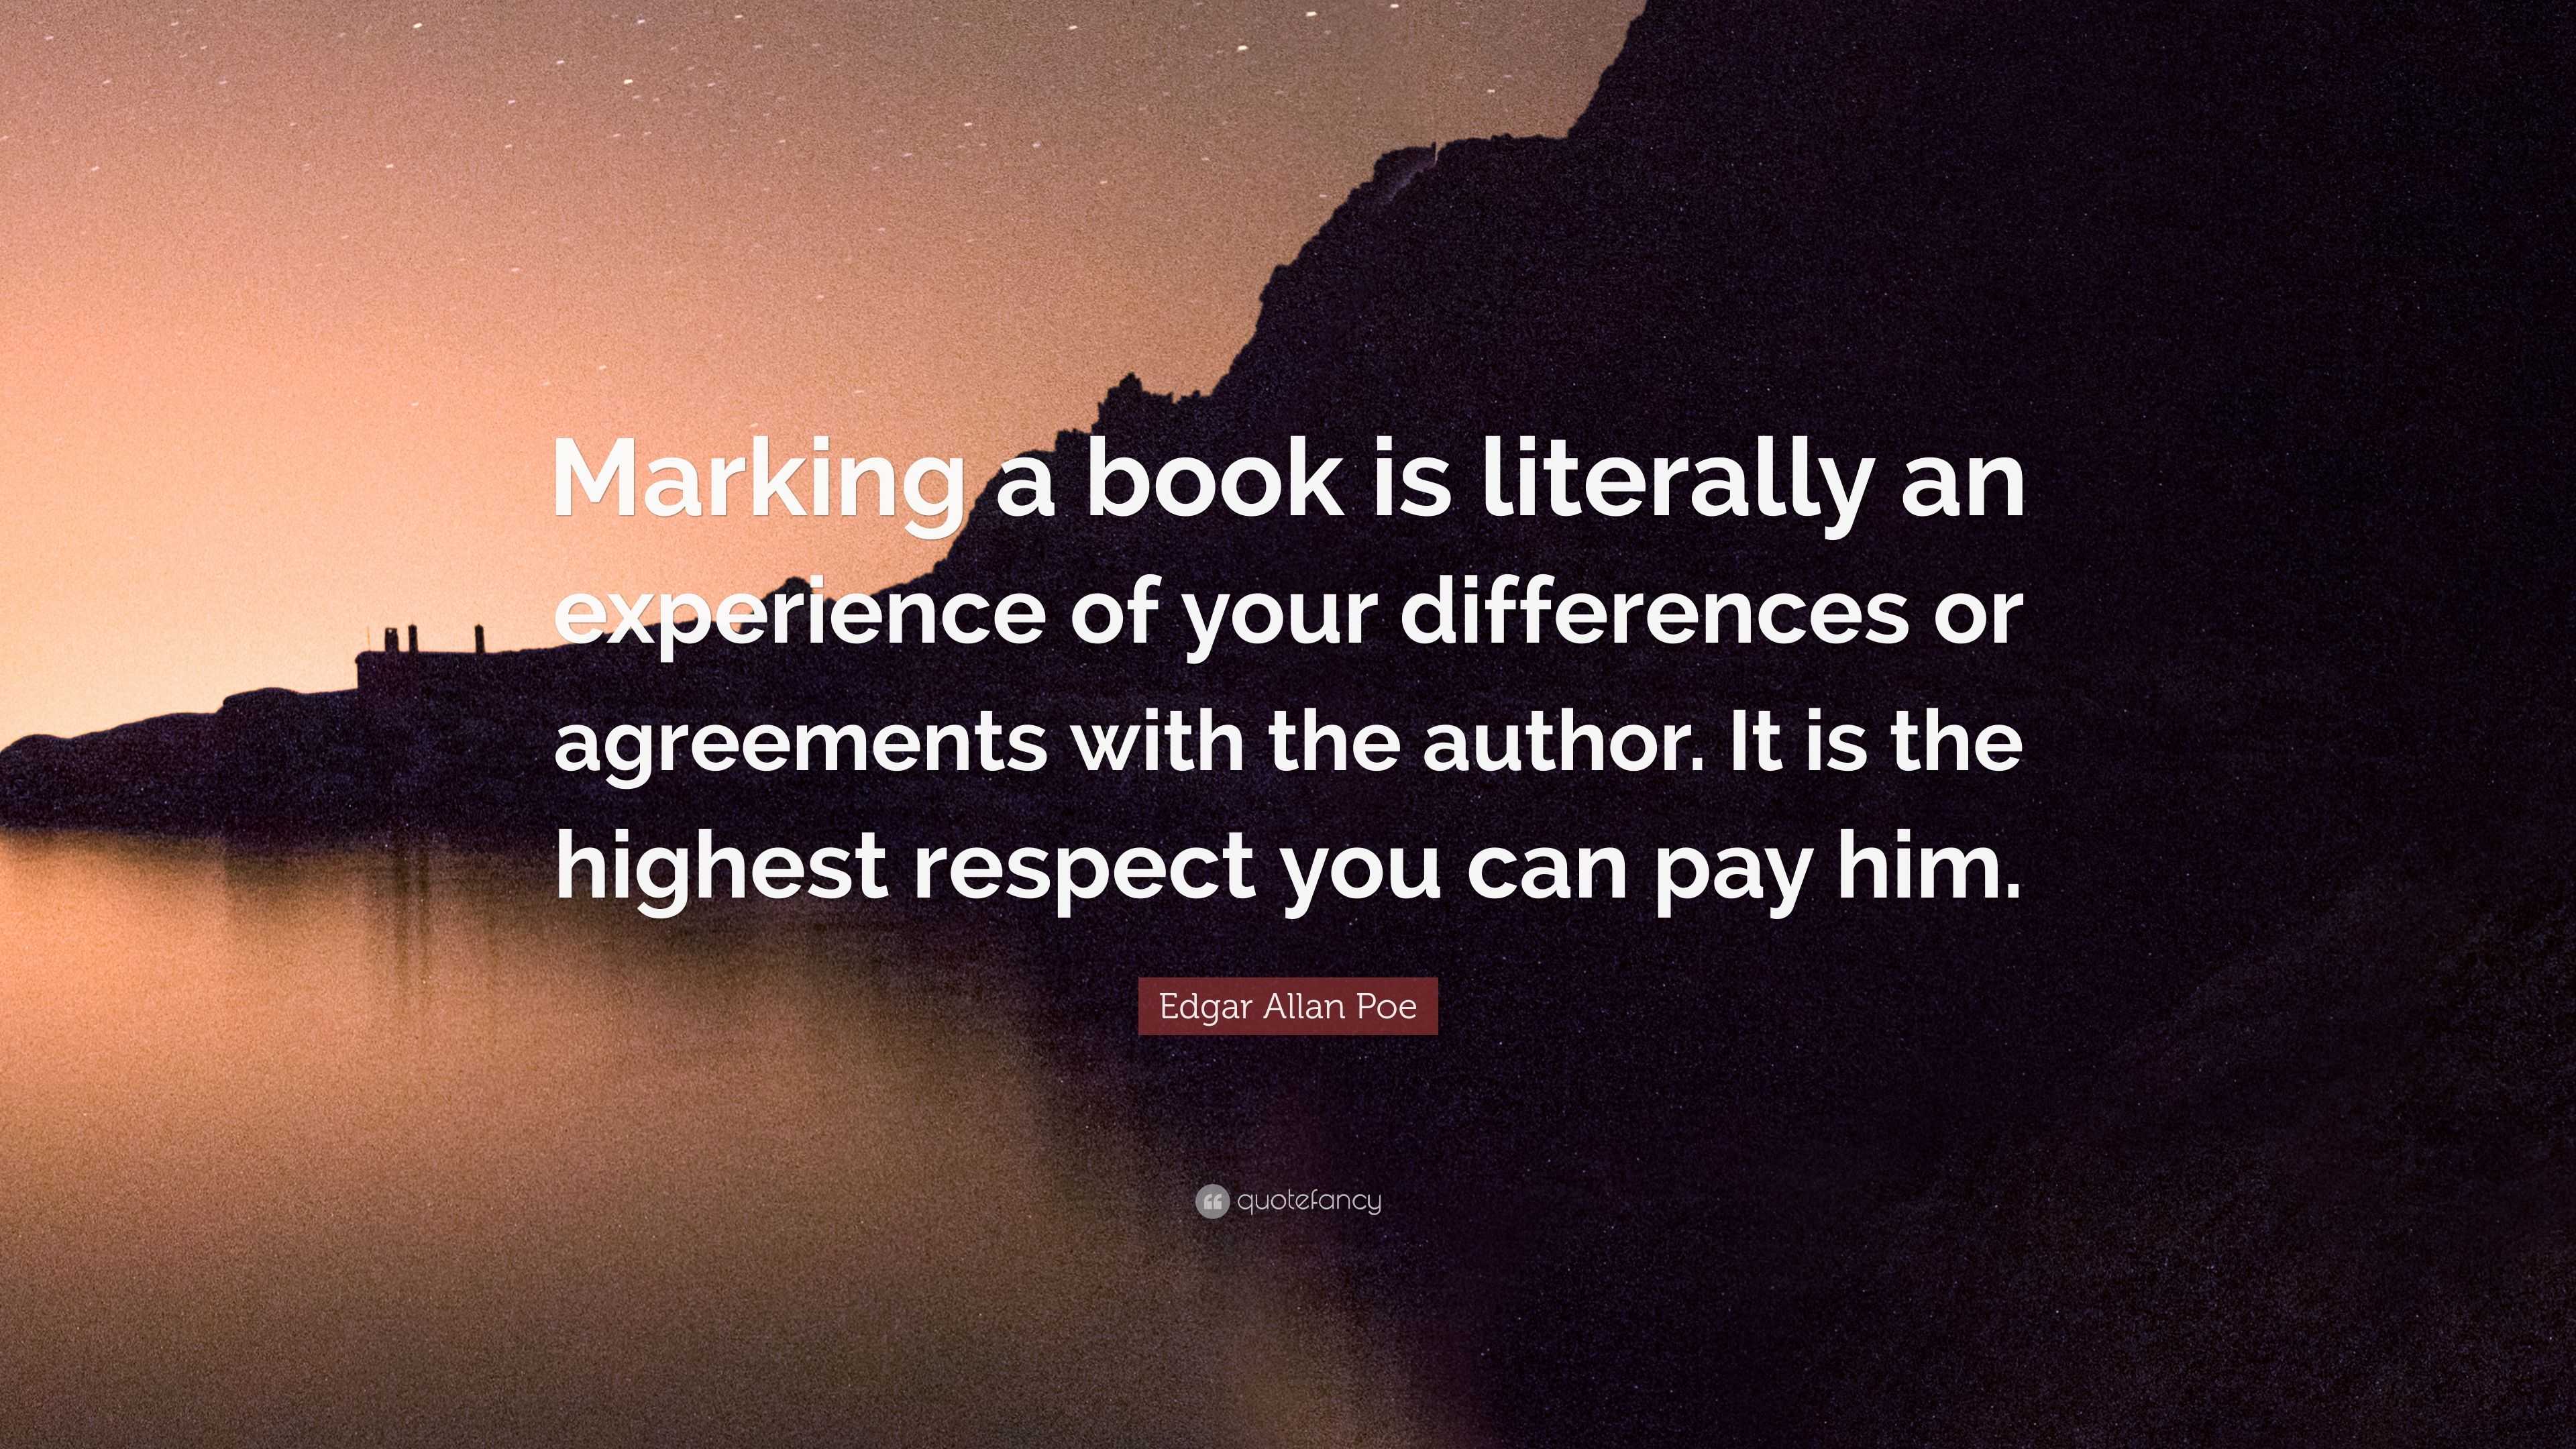 Edgar Allan Poe Quote: “Marking a book is literally an experience of